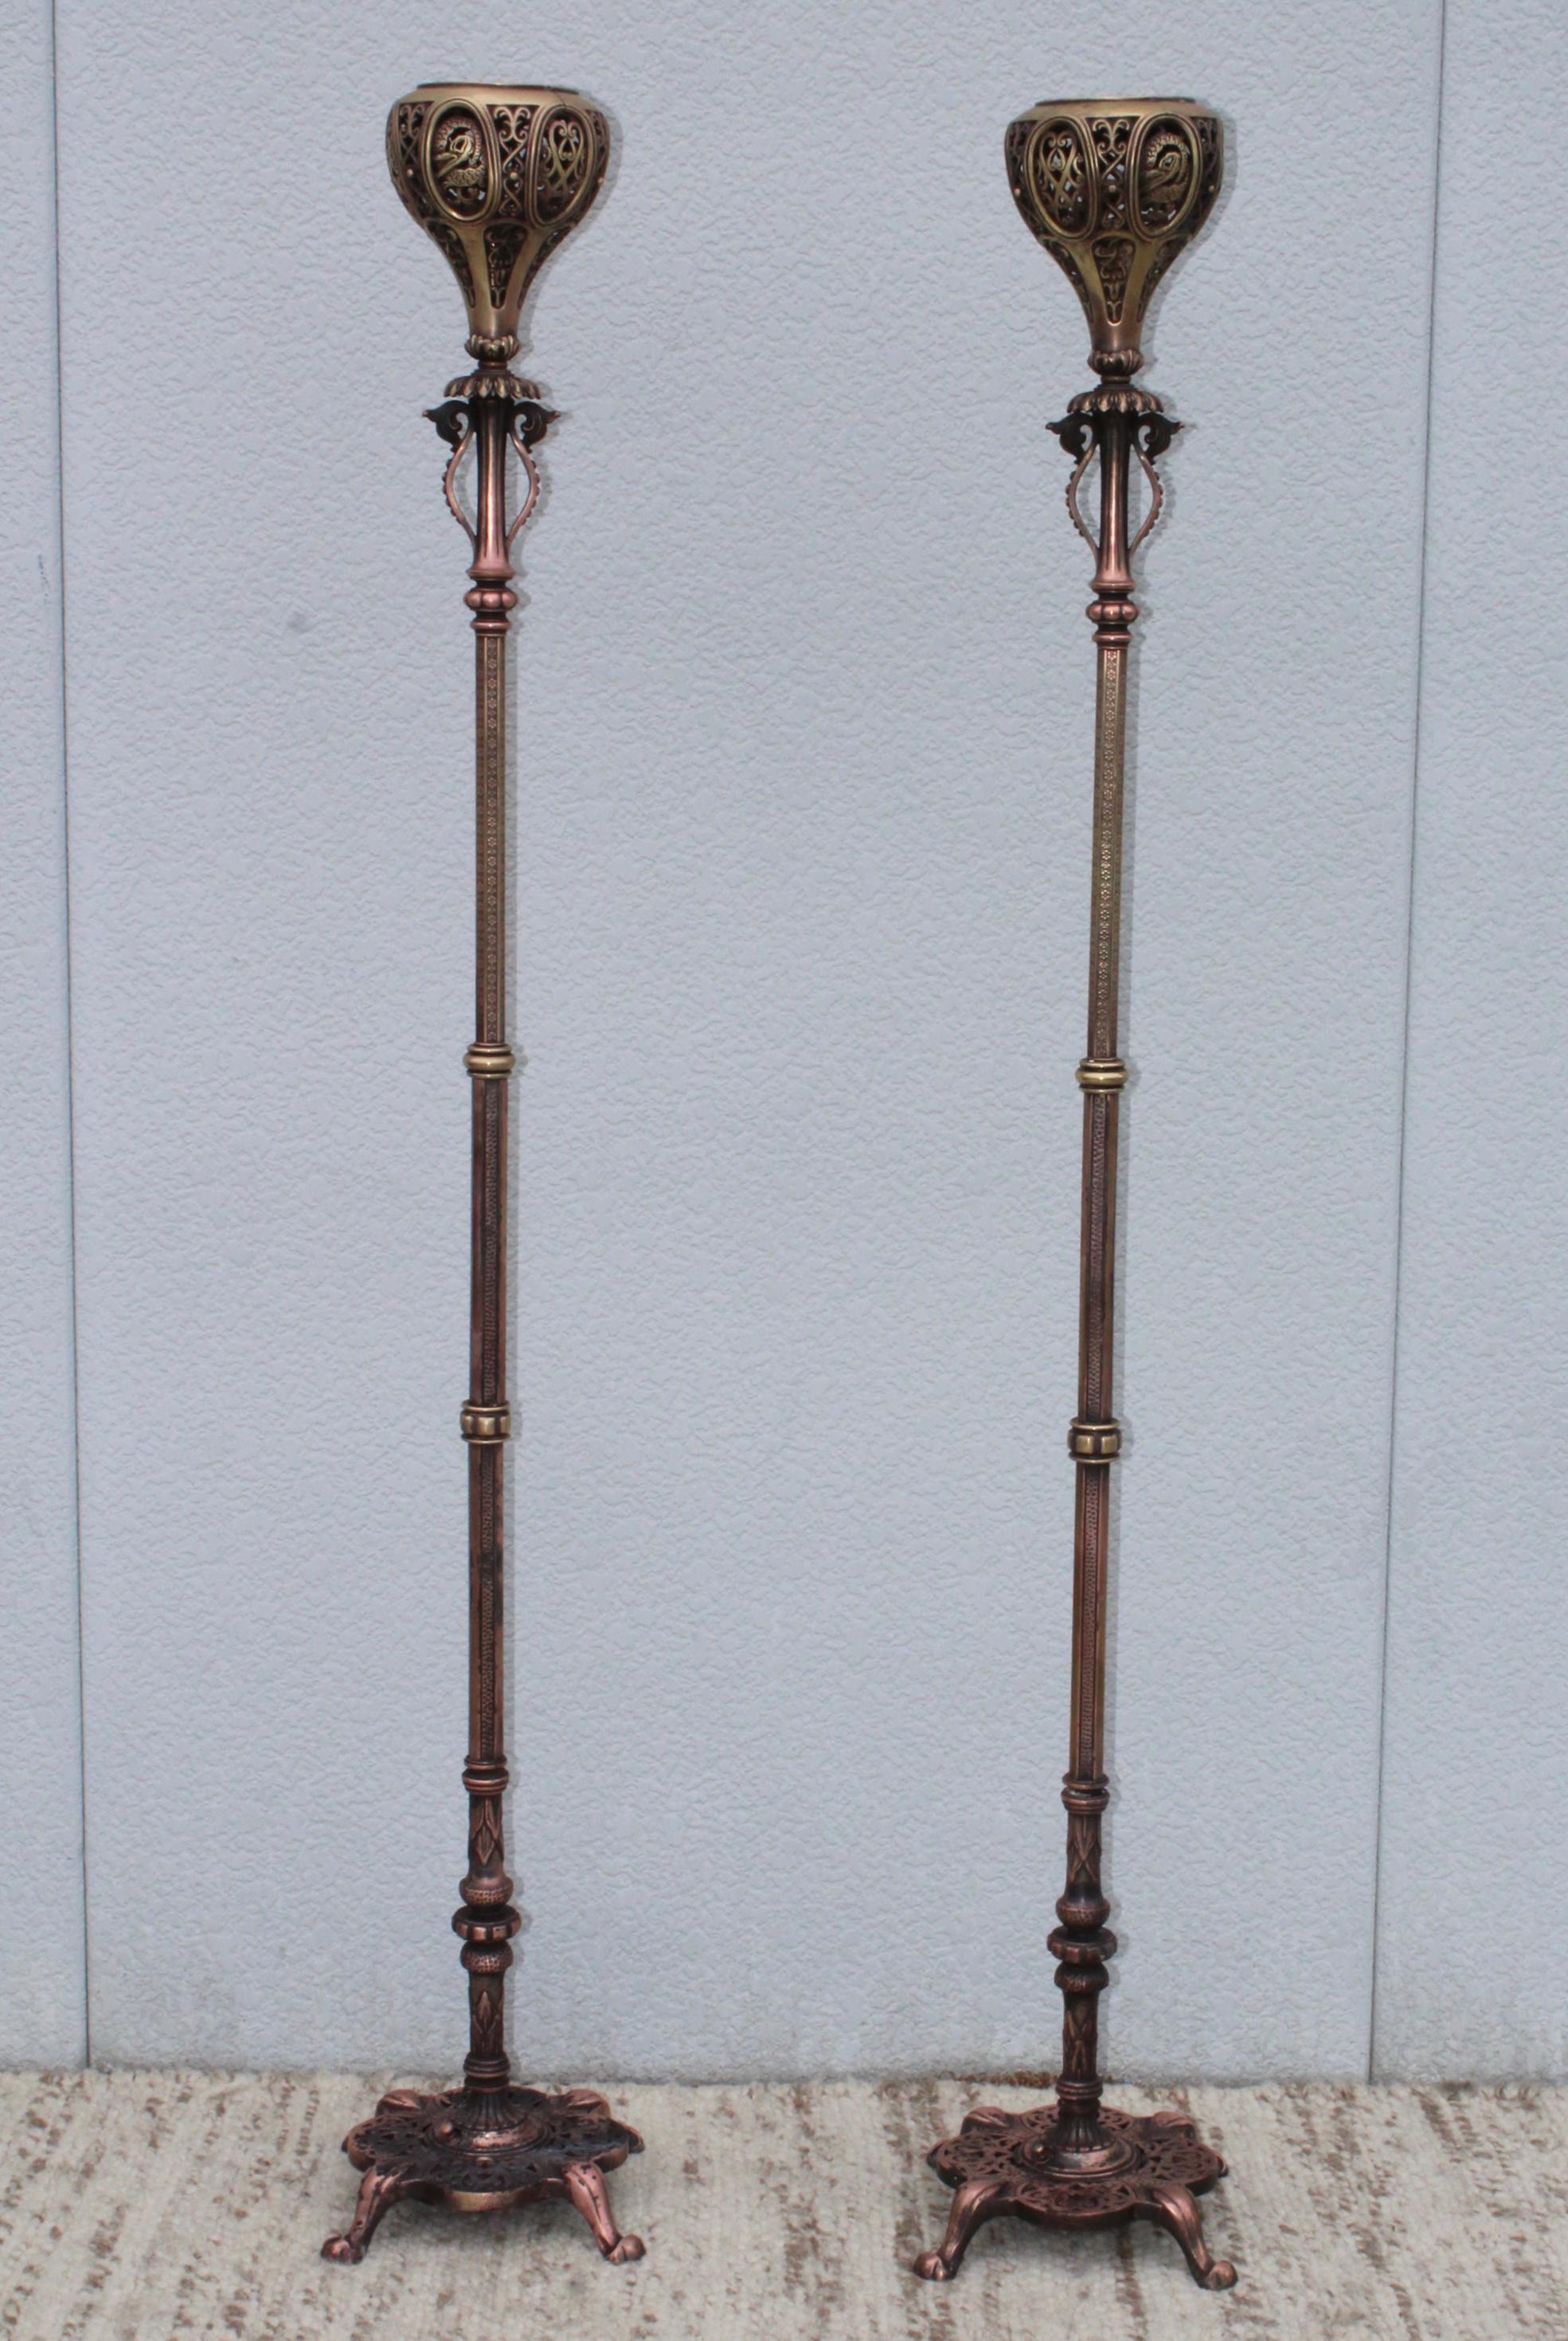 A pair of 1900s Chinese cast iron, brass and bronze floor lamps, in vintage condition lightly polished with some wear and patina due to age and use. Newly rewired and ready to use.